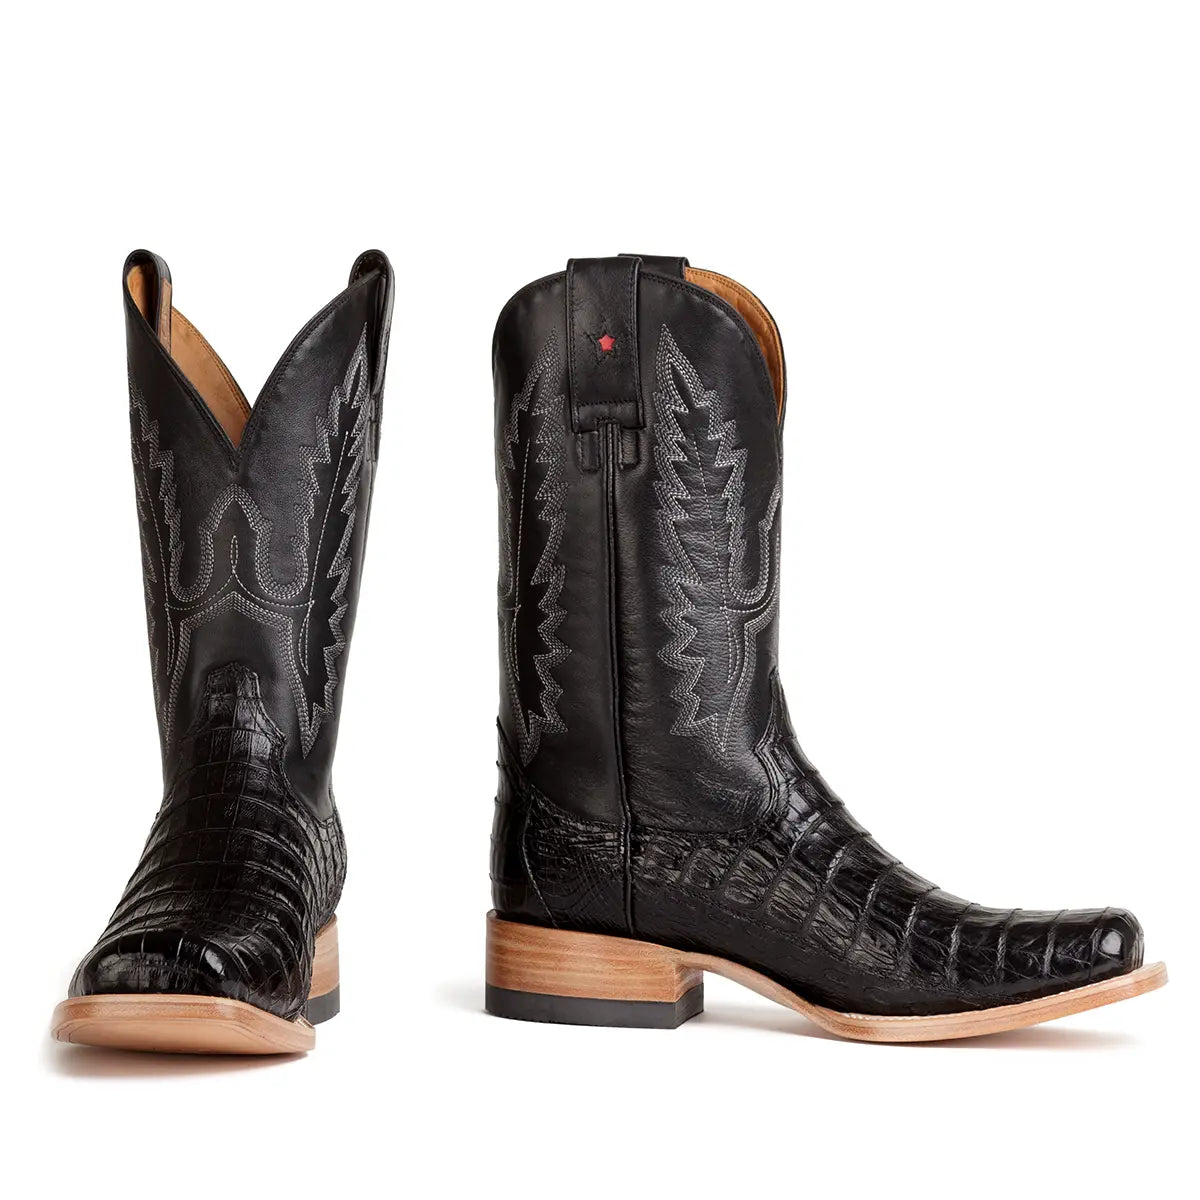 Garner Caiman Tail Belly Cut Stockman Square Toe Boot - Black